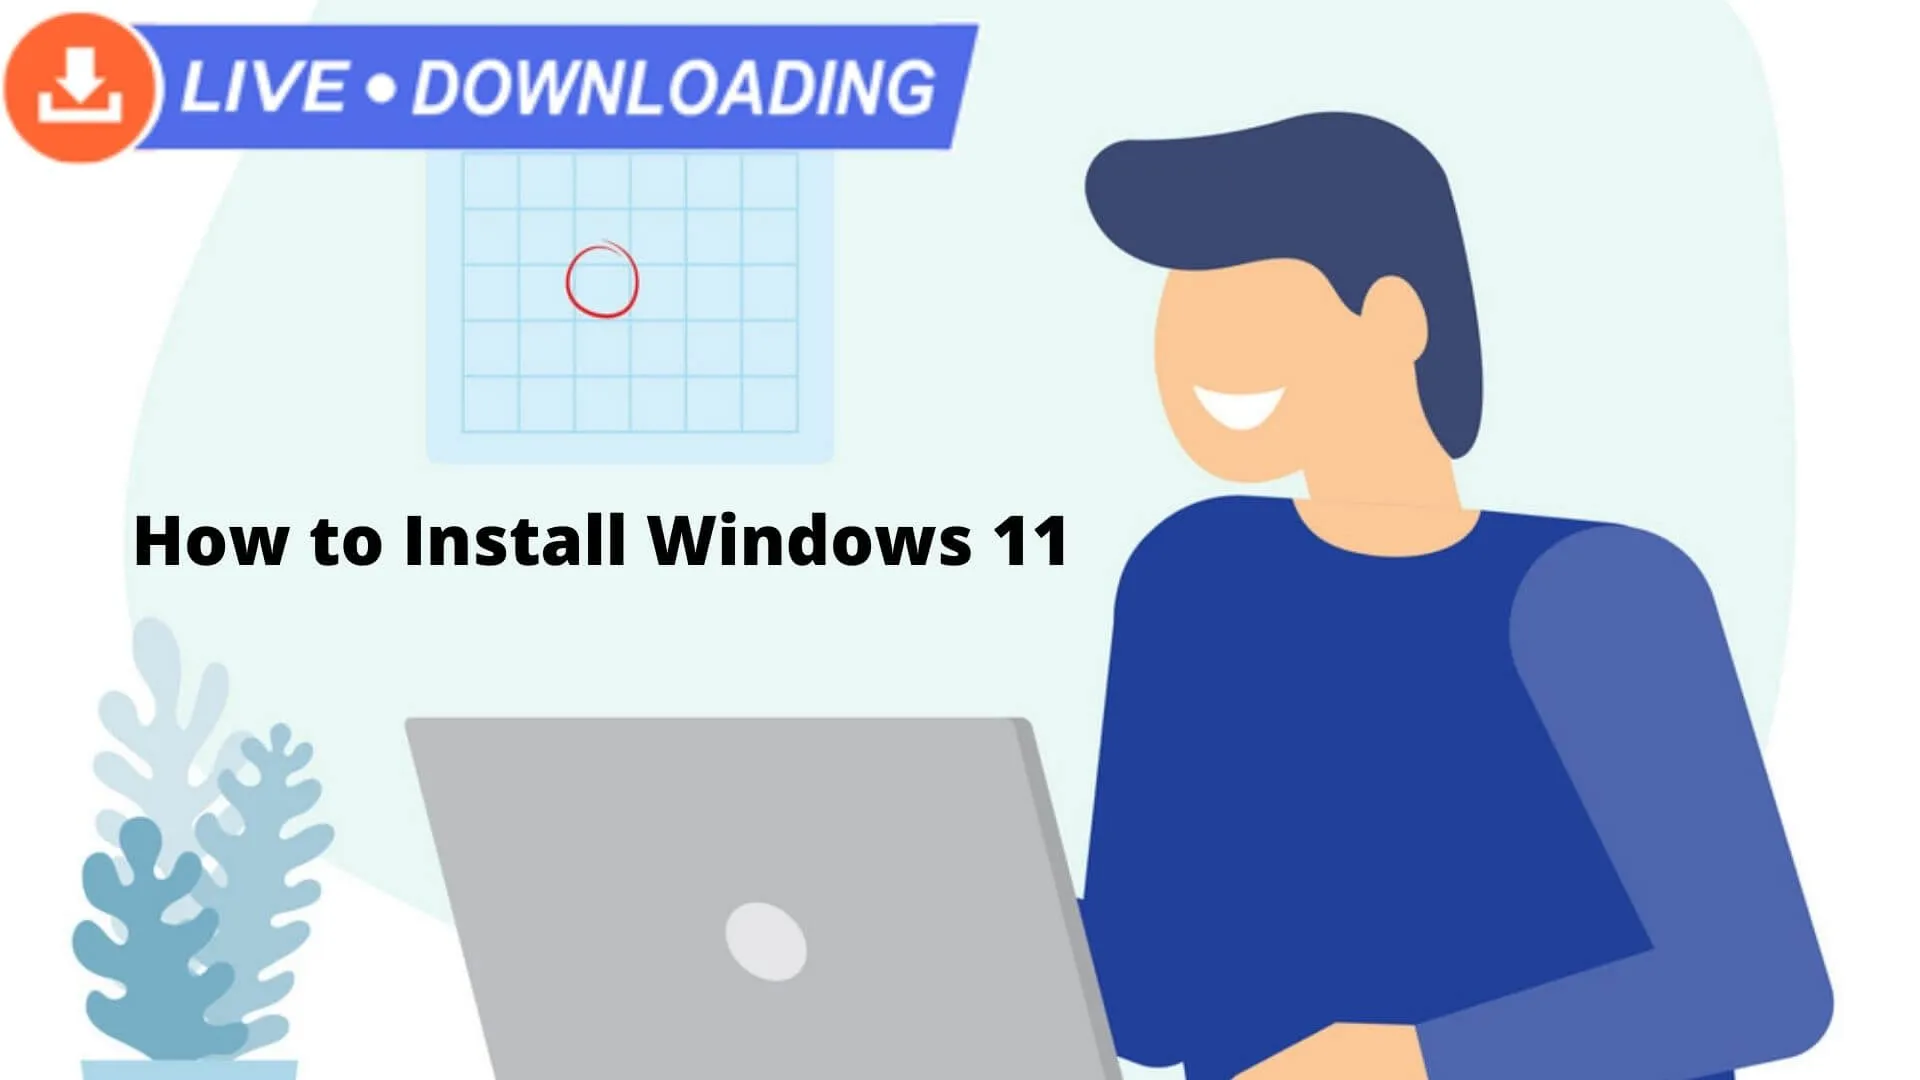 How to install Windows 11 on your PC? - LD